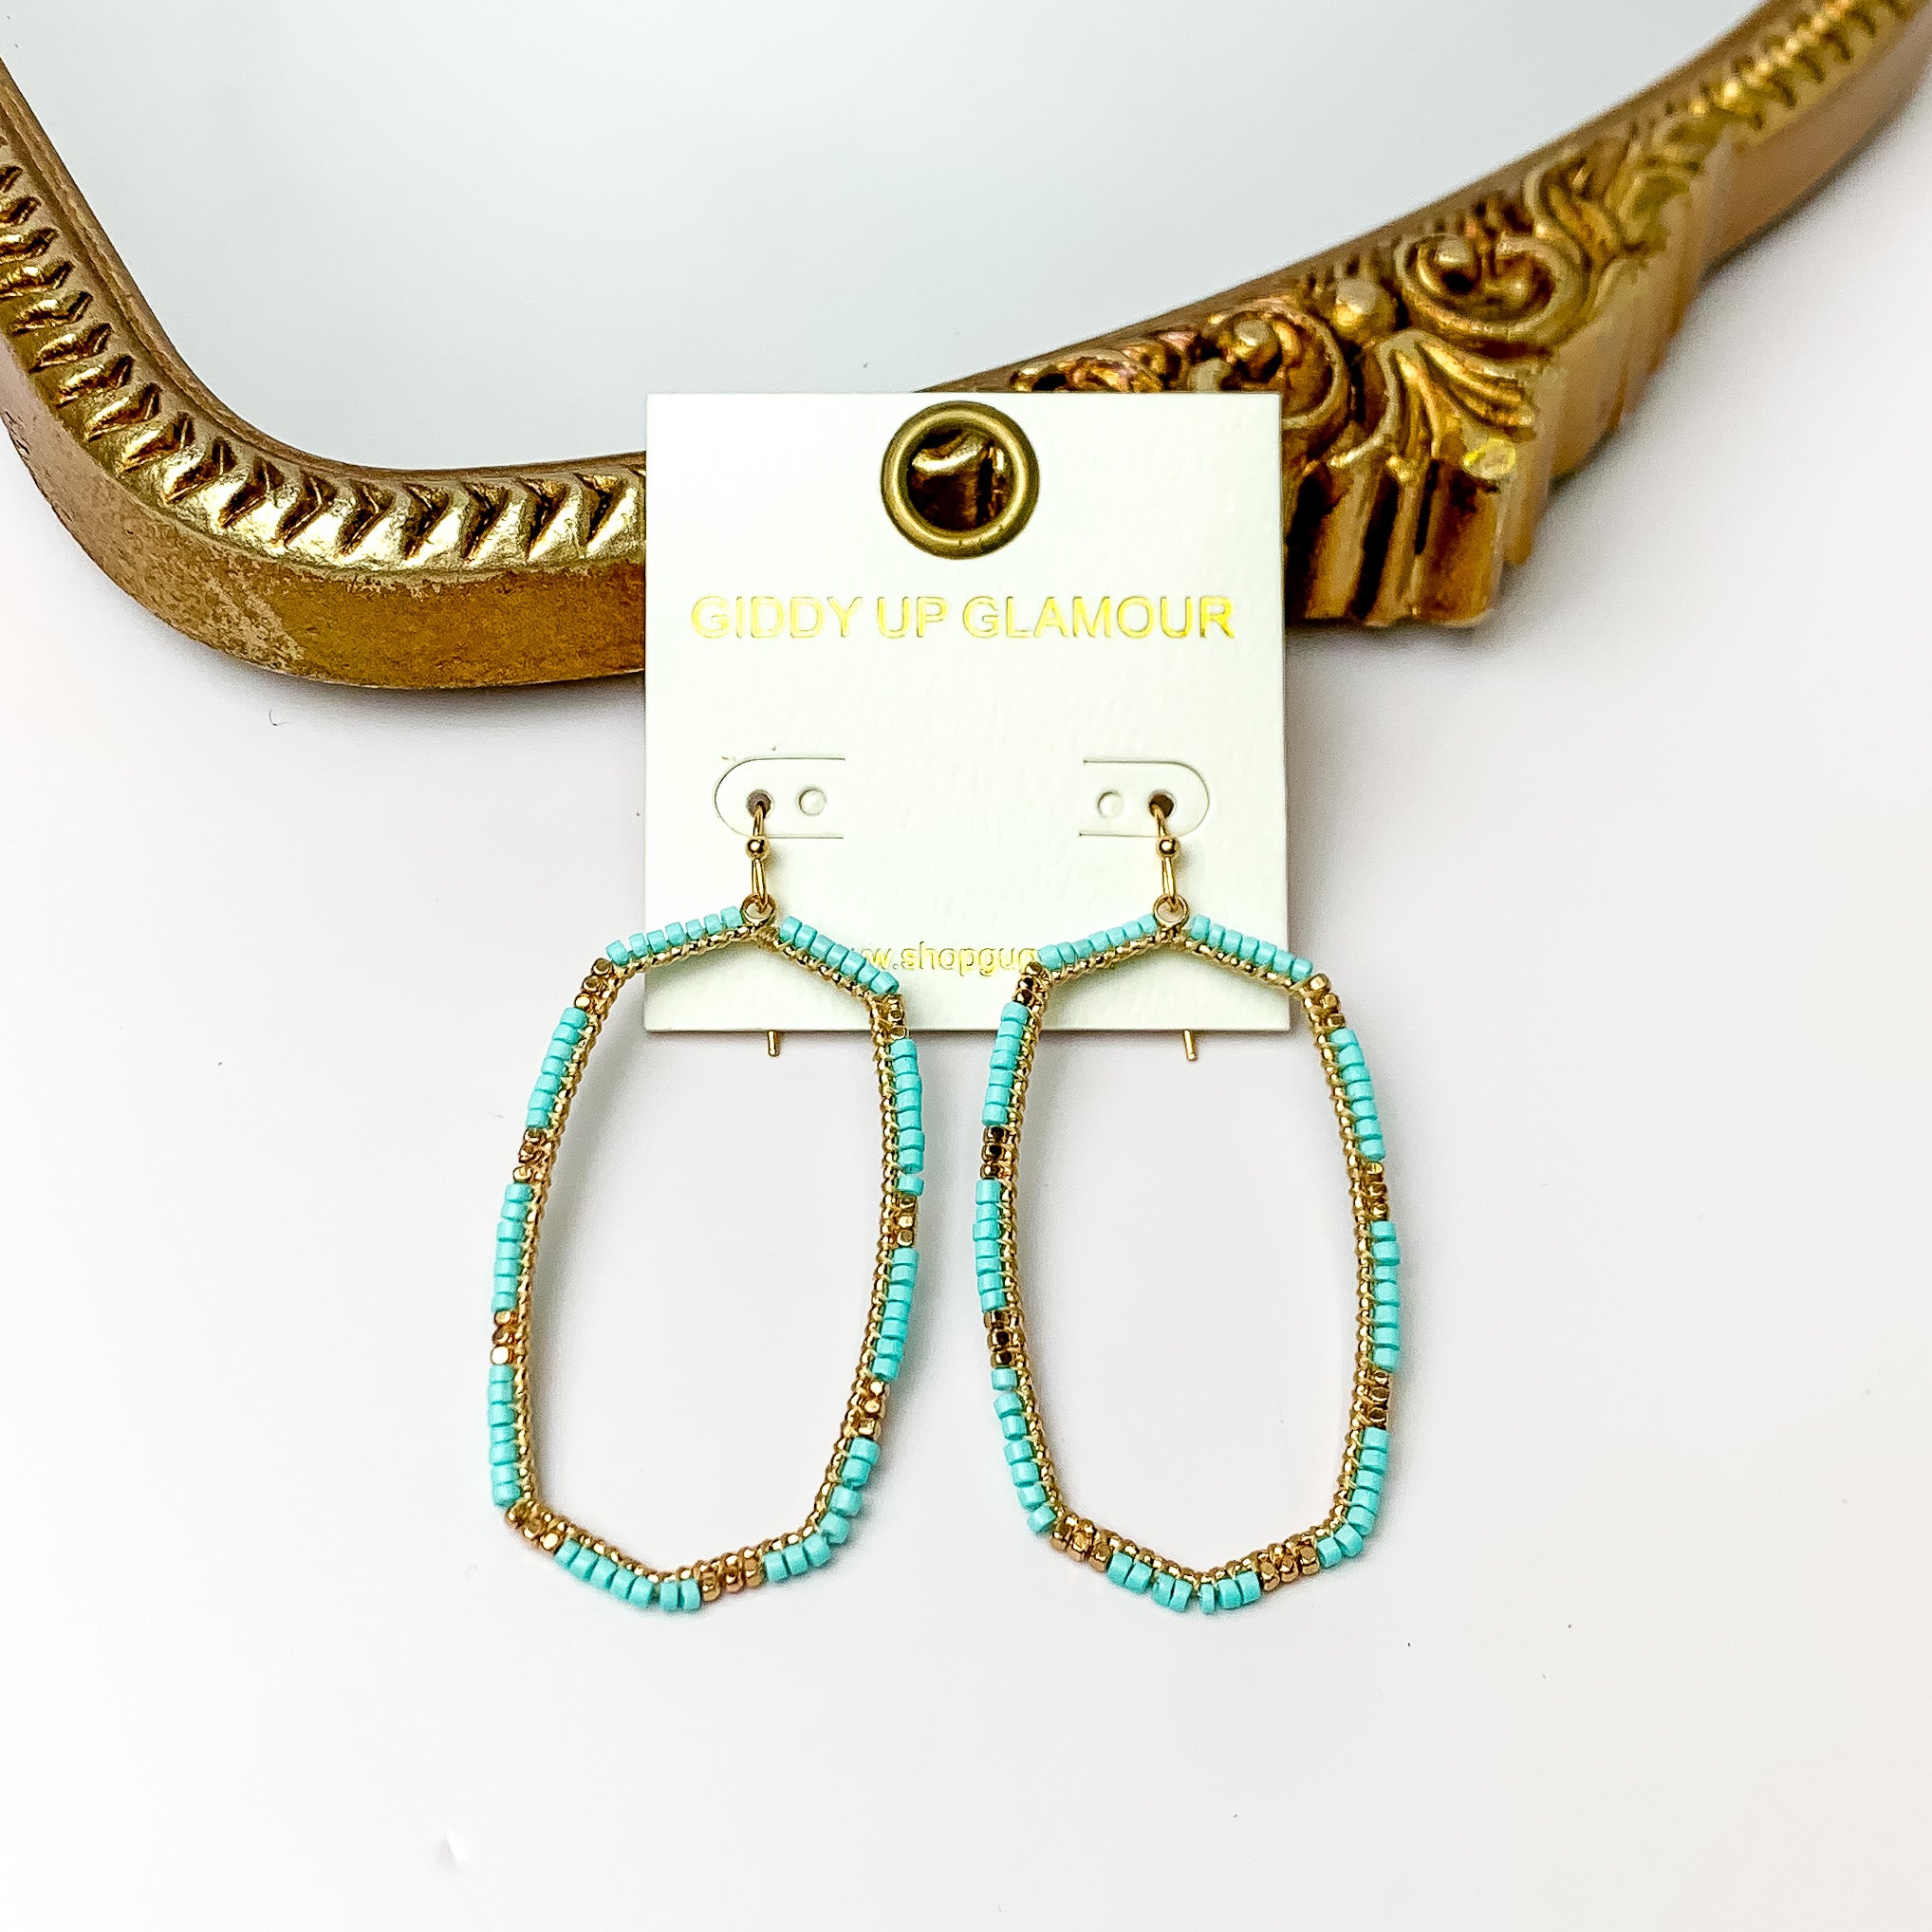 Turquoise Beaded Open Large Drop Earrings with Gold Tone Accessory. Pictured on a white background with a gold frame through it. 